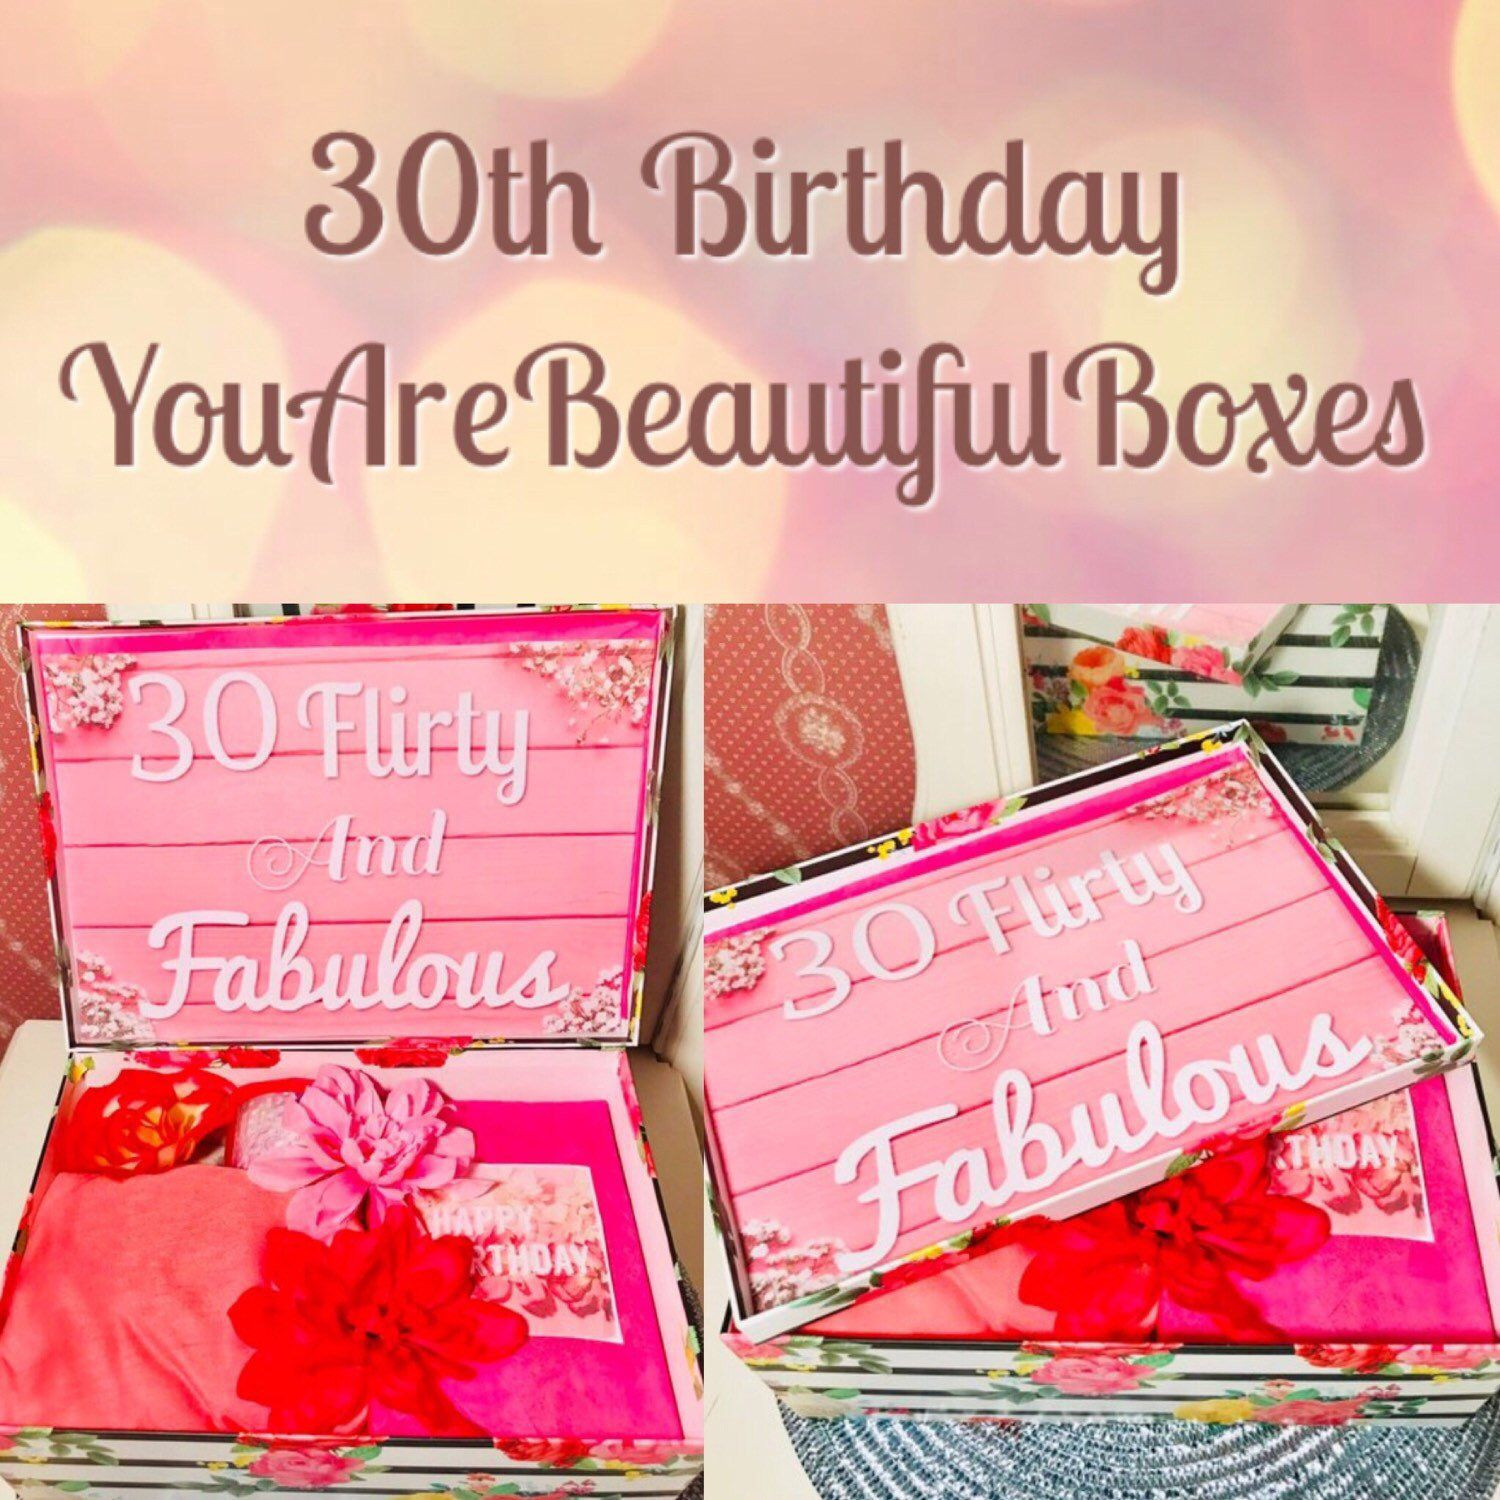 30Th Birthday Gift Ideas For Girlfriend
 30th Birthday YouAreBeautifulBox Collection